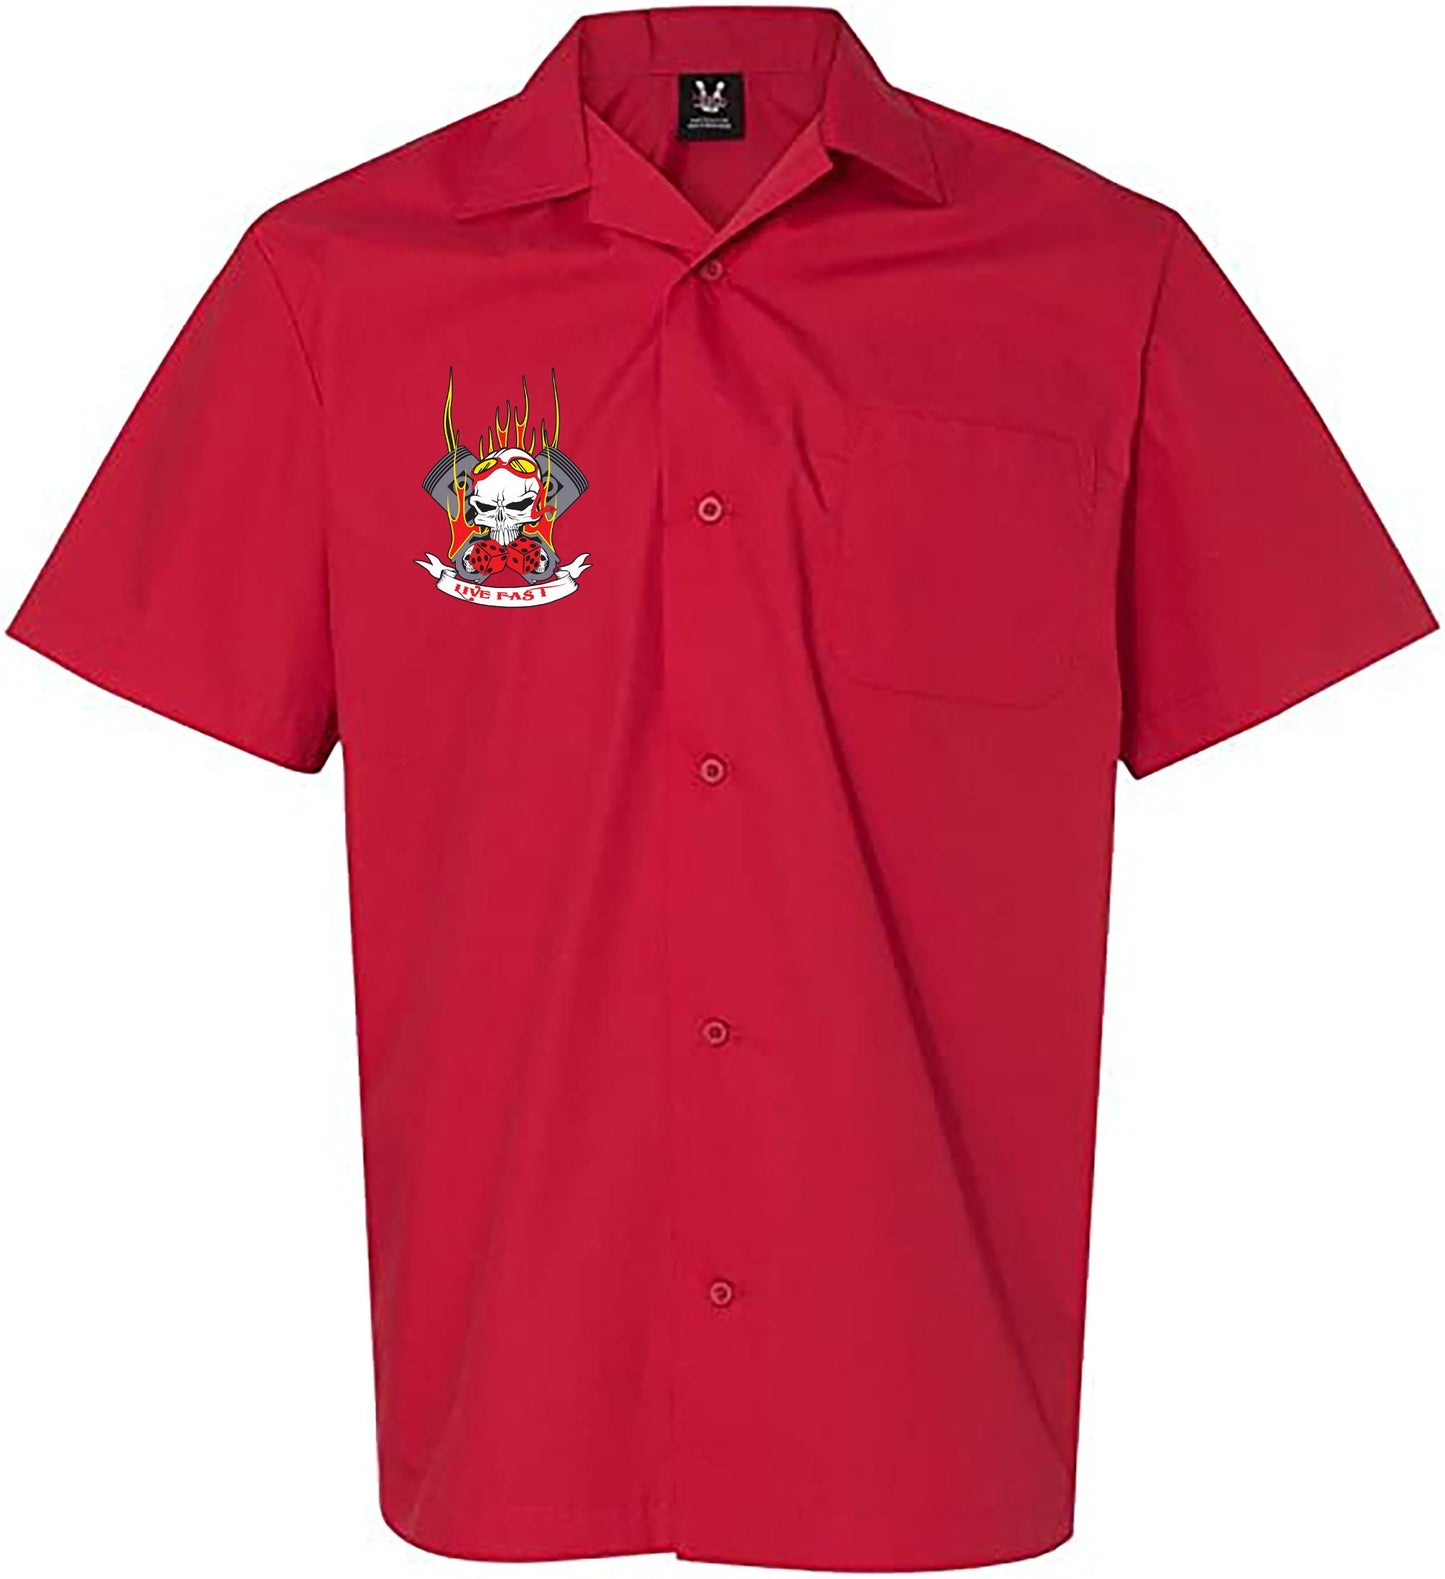 Flaming Pistons Classic Retro Bowling Shirt- Vintage Bowler ( Closeout) in multiple colors  - Includes Embroidered Name #237